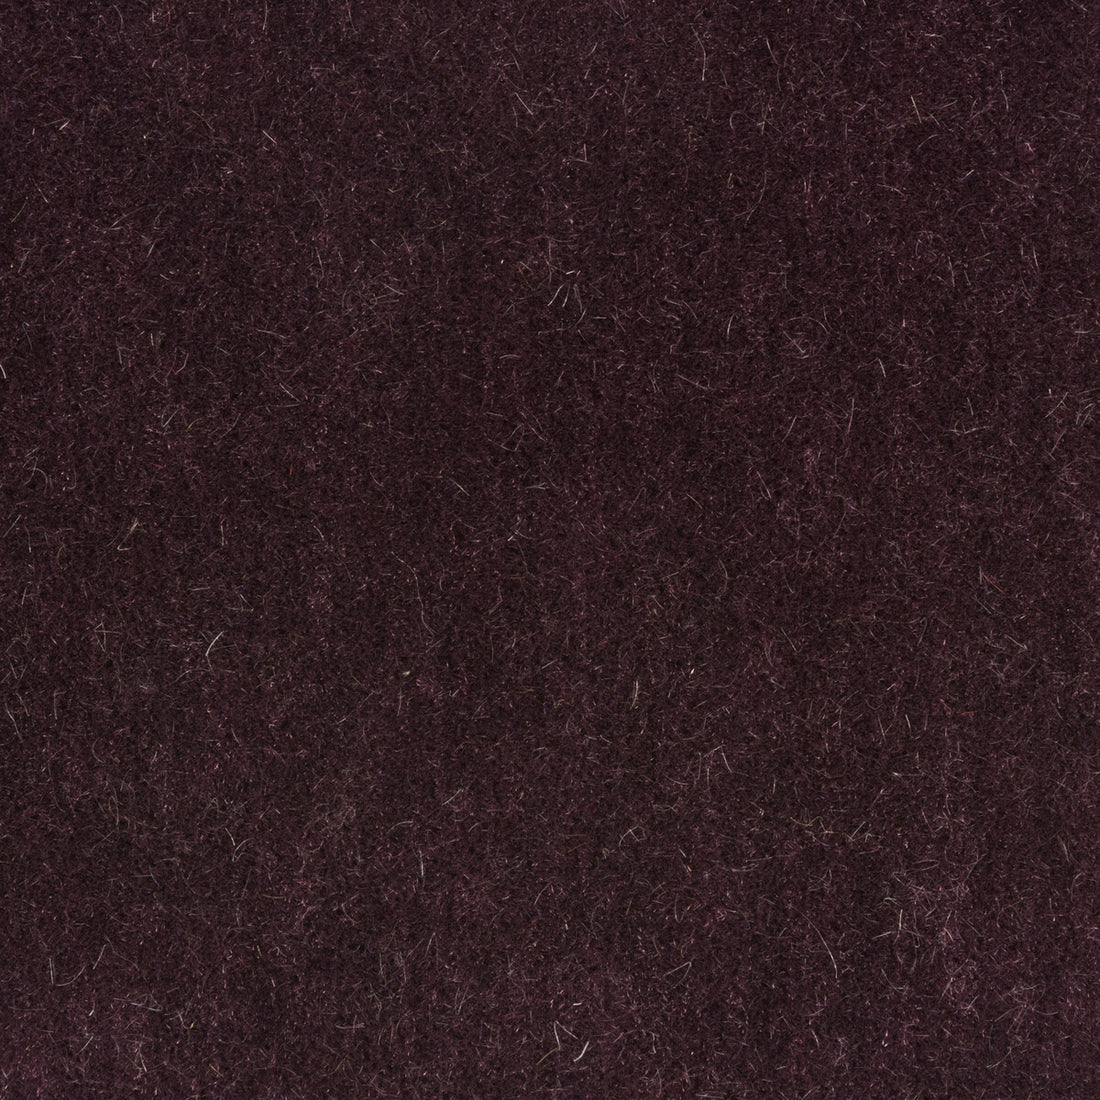 Windsor Mohair fabric in plum color - pattern 34258.10.0 - by Kravet Couture